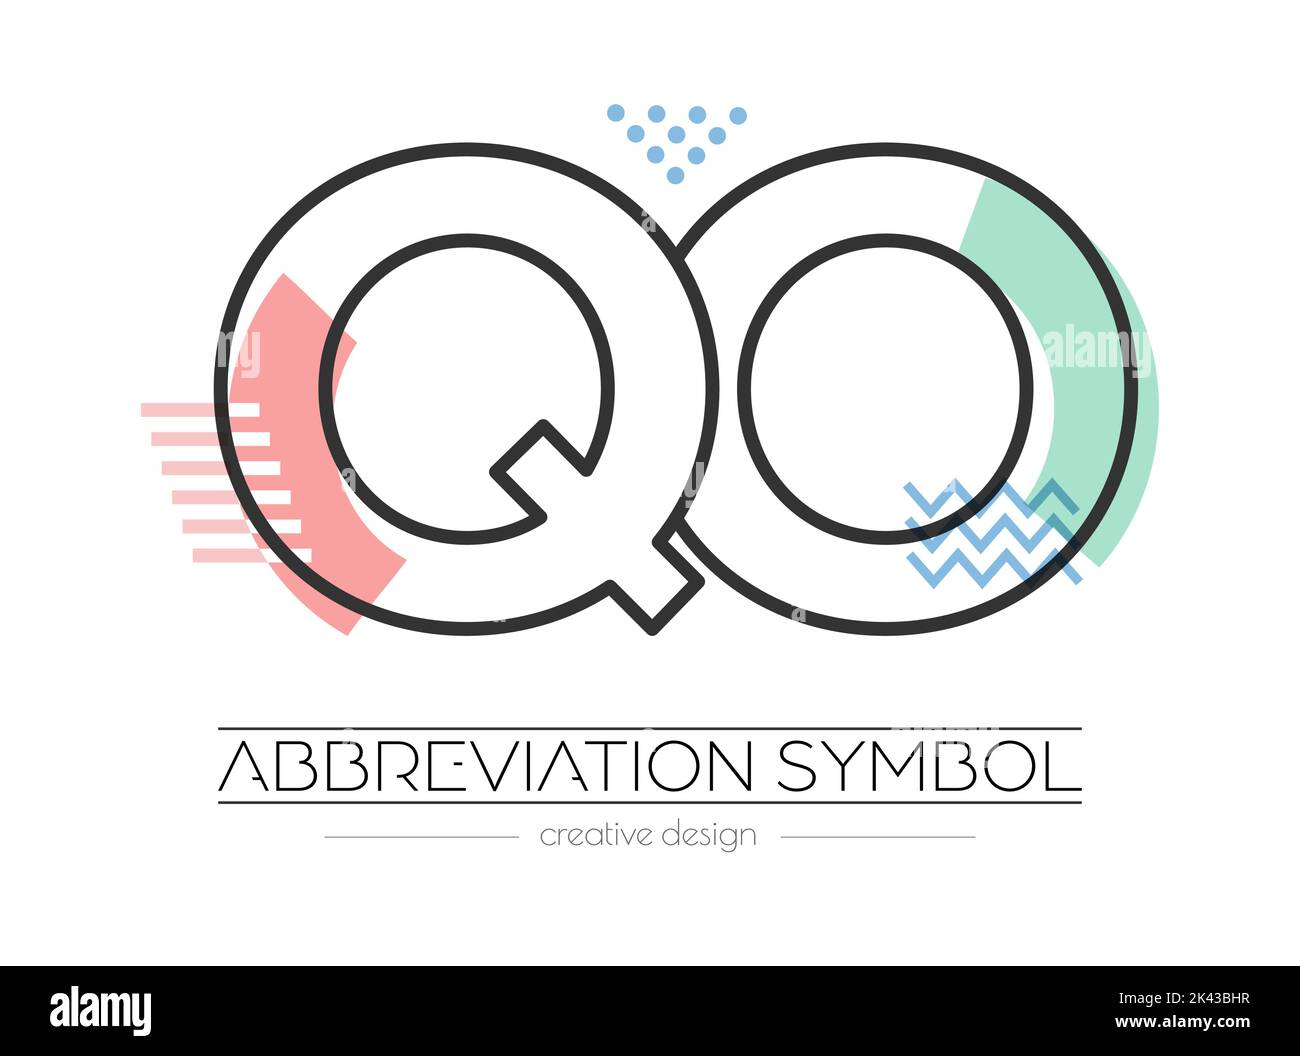 Letters Q and O. Merging of two letters. Initials logo or abbreviation symbol. Vector illustration for creative design and creative ideas. Flat style. Stock Vector